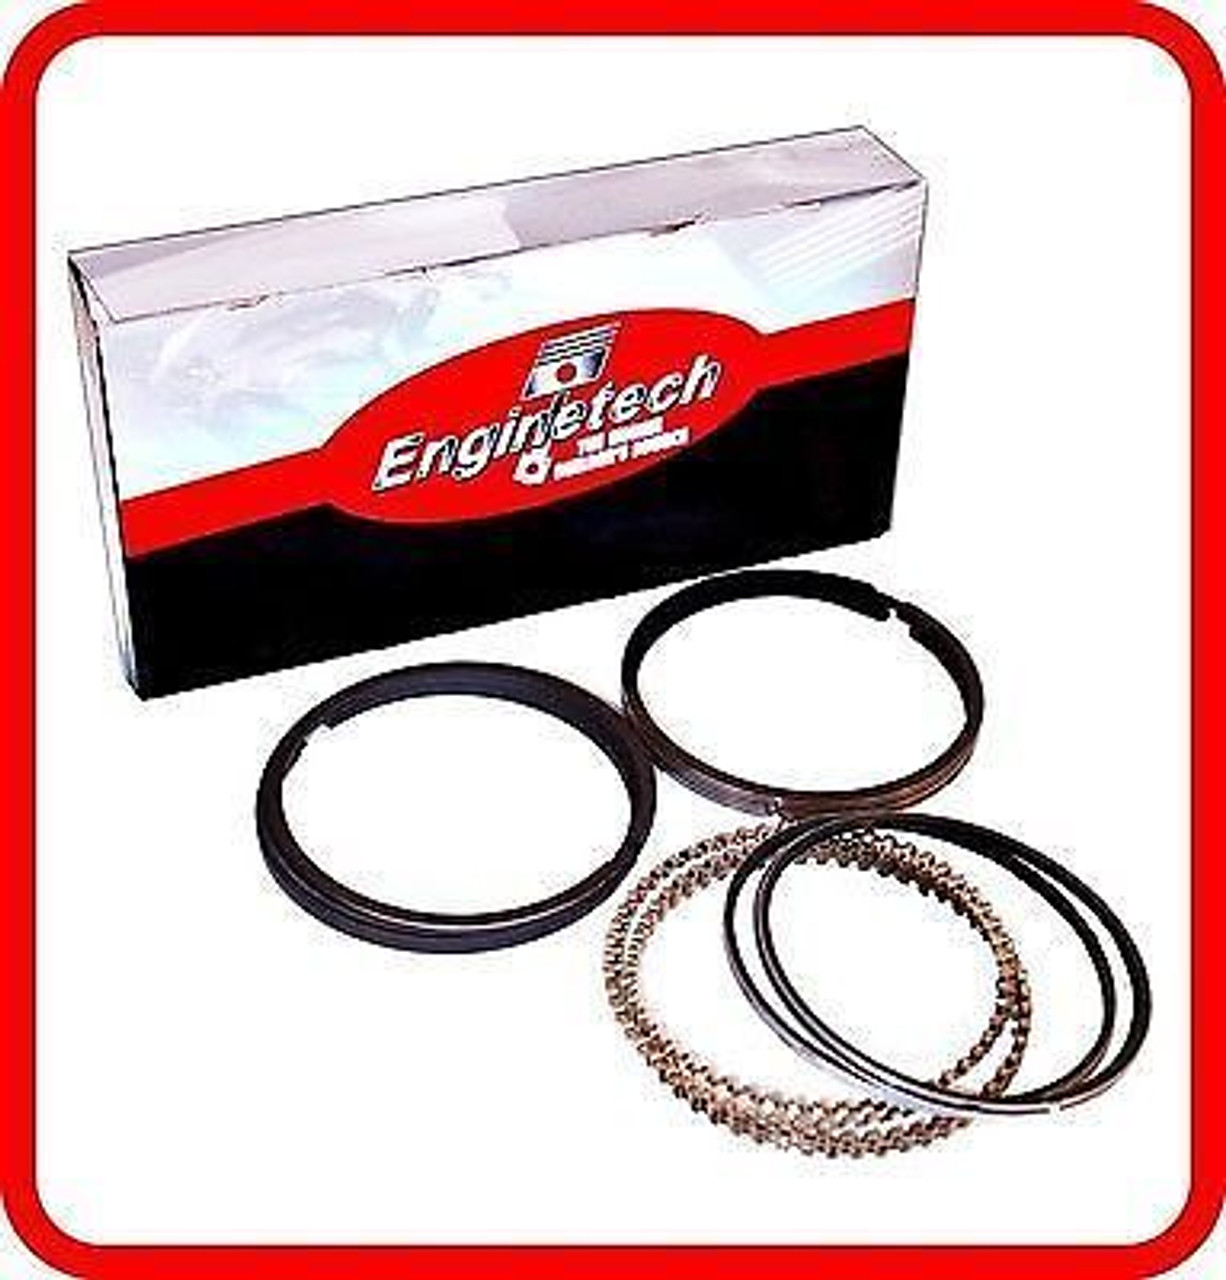 1991 Chrysler Town & Country 3.3L Engine Piston Ring Set S93136 -40